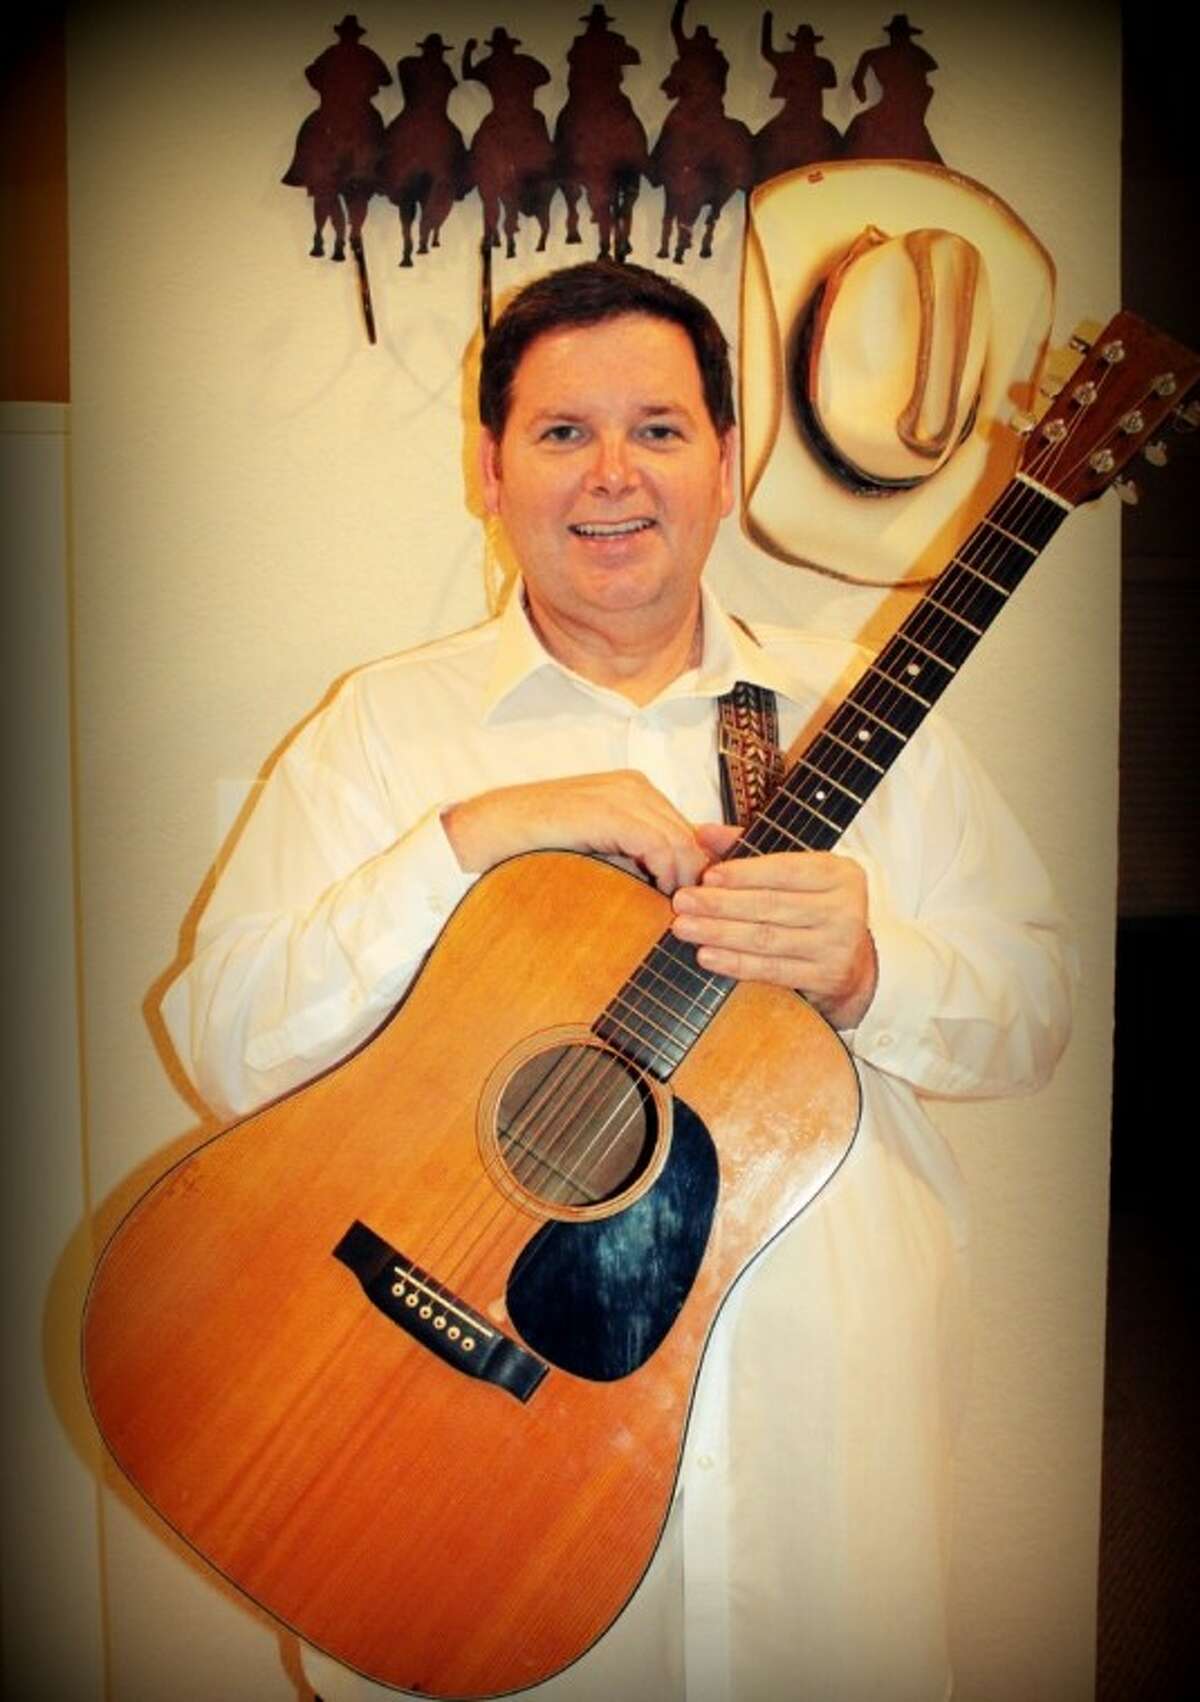 Pasadena Police Sgt. Ronnie Jordan with his vintage Martin guitar. That purchase in 1970 began a long involvement in music. As pastor of Cathedral of Praise Assembly Church at11303 C.E. King Pkwy, Houston, Jordan has a message of faith and hope.